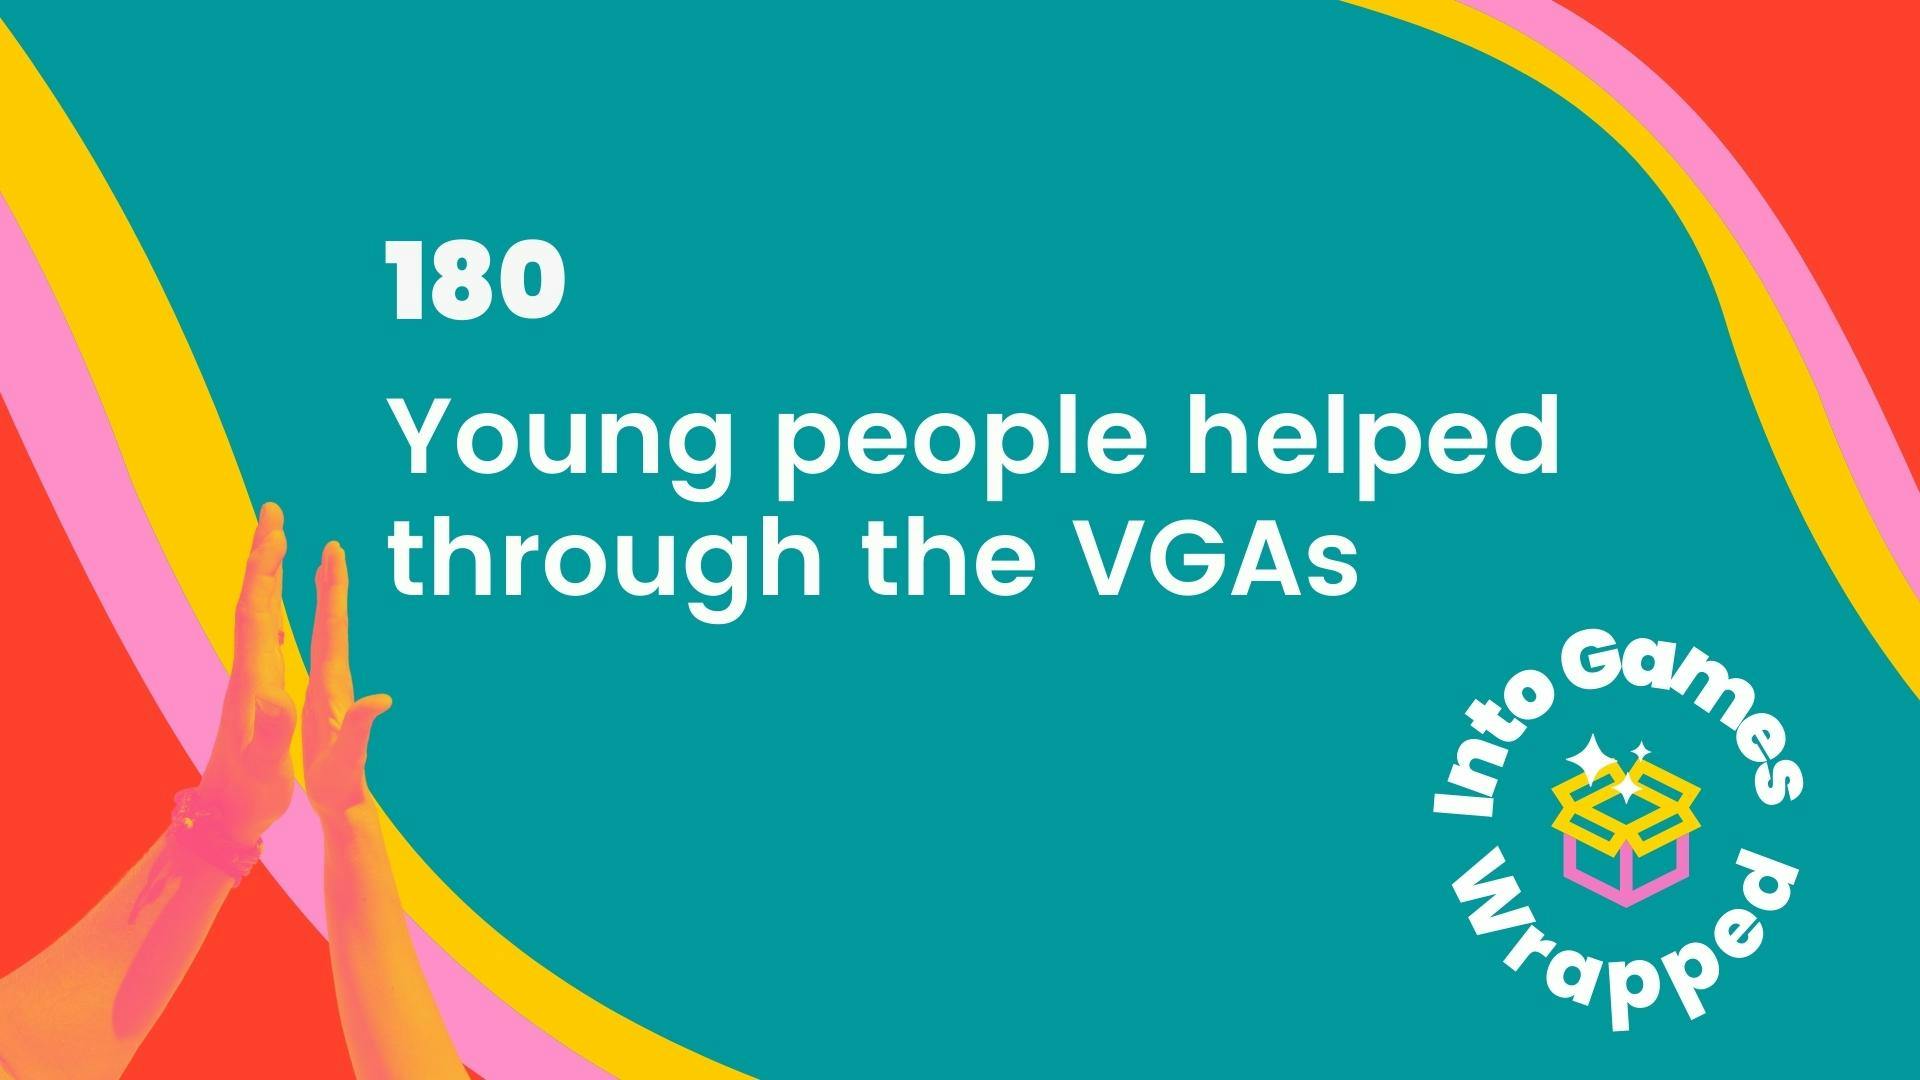 180 Young people helped through the VGAs